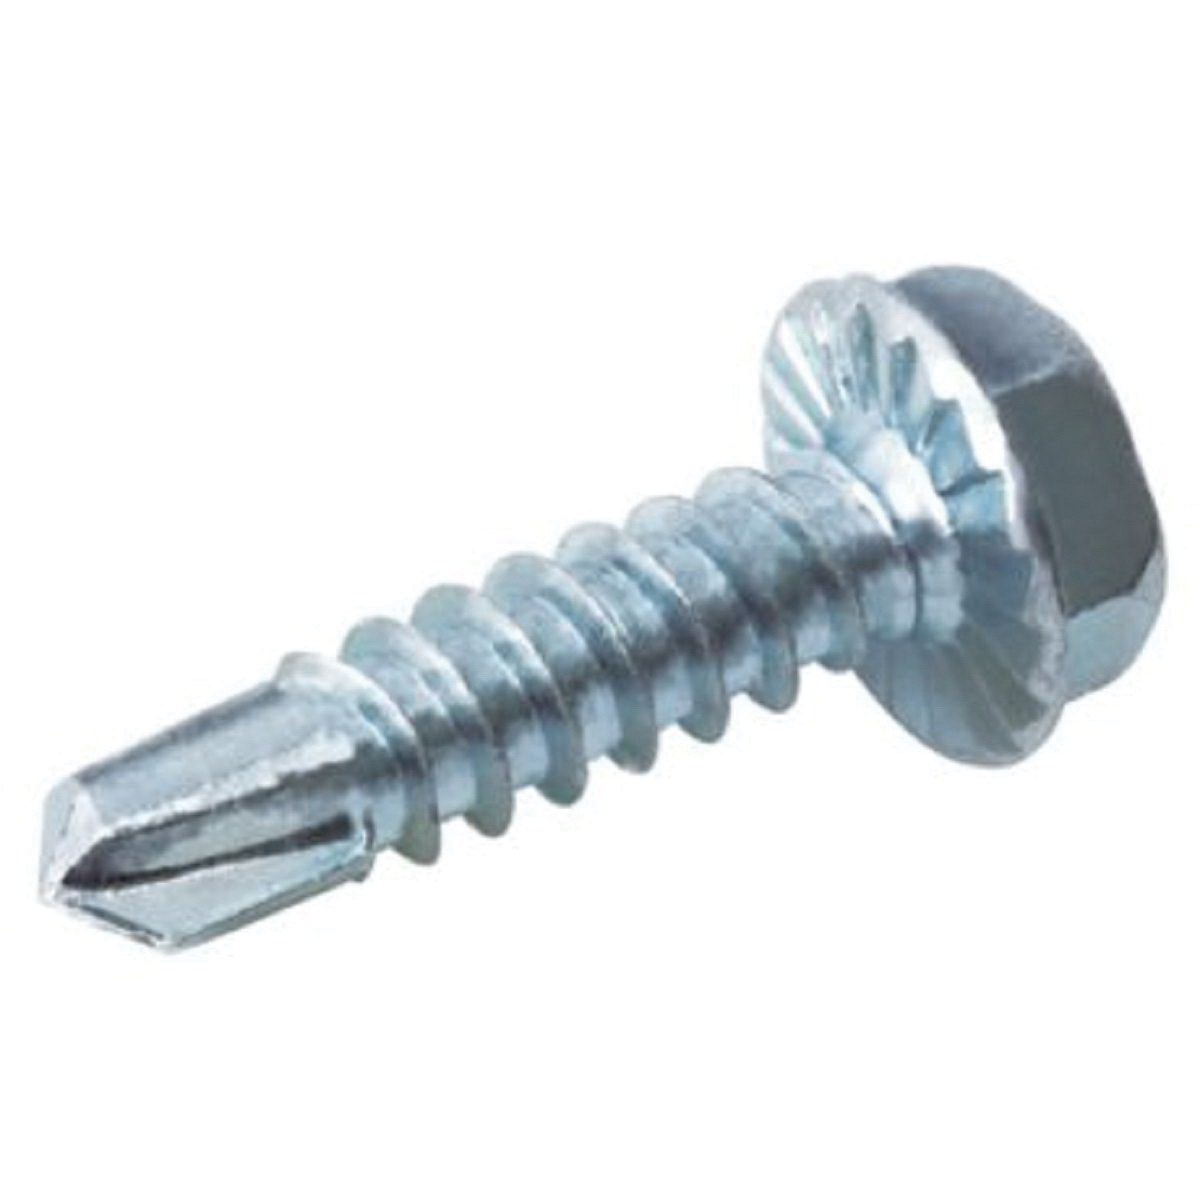 Duro Dyne® Pro Point 14210 Self Piercing Screw, #10 Thread, 3/4 in OAL, Hexagonal Head, 5/16 in Drive, Unslotted Drive